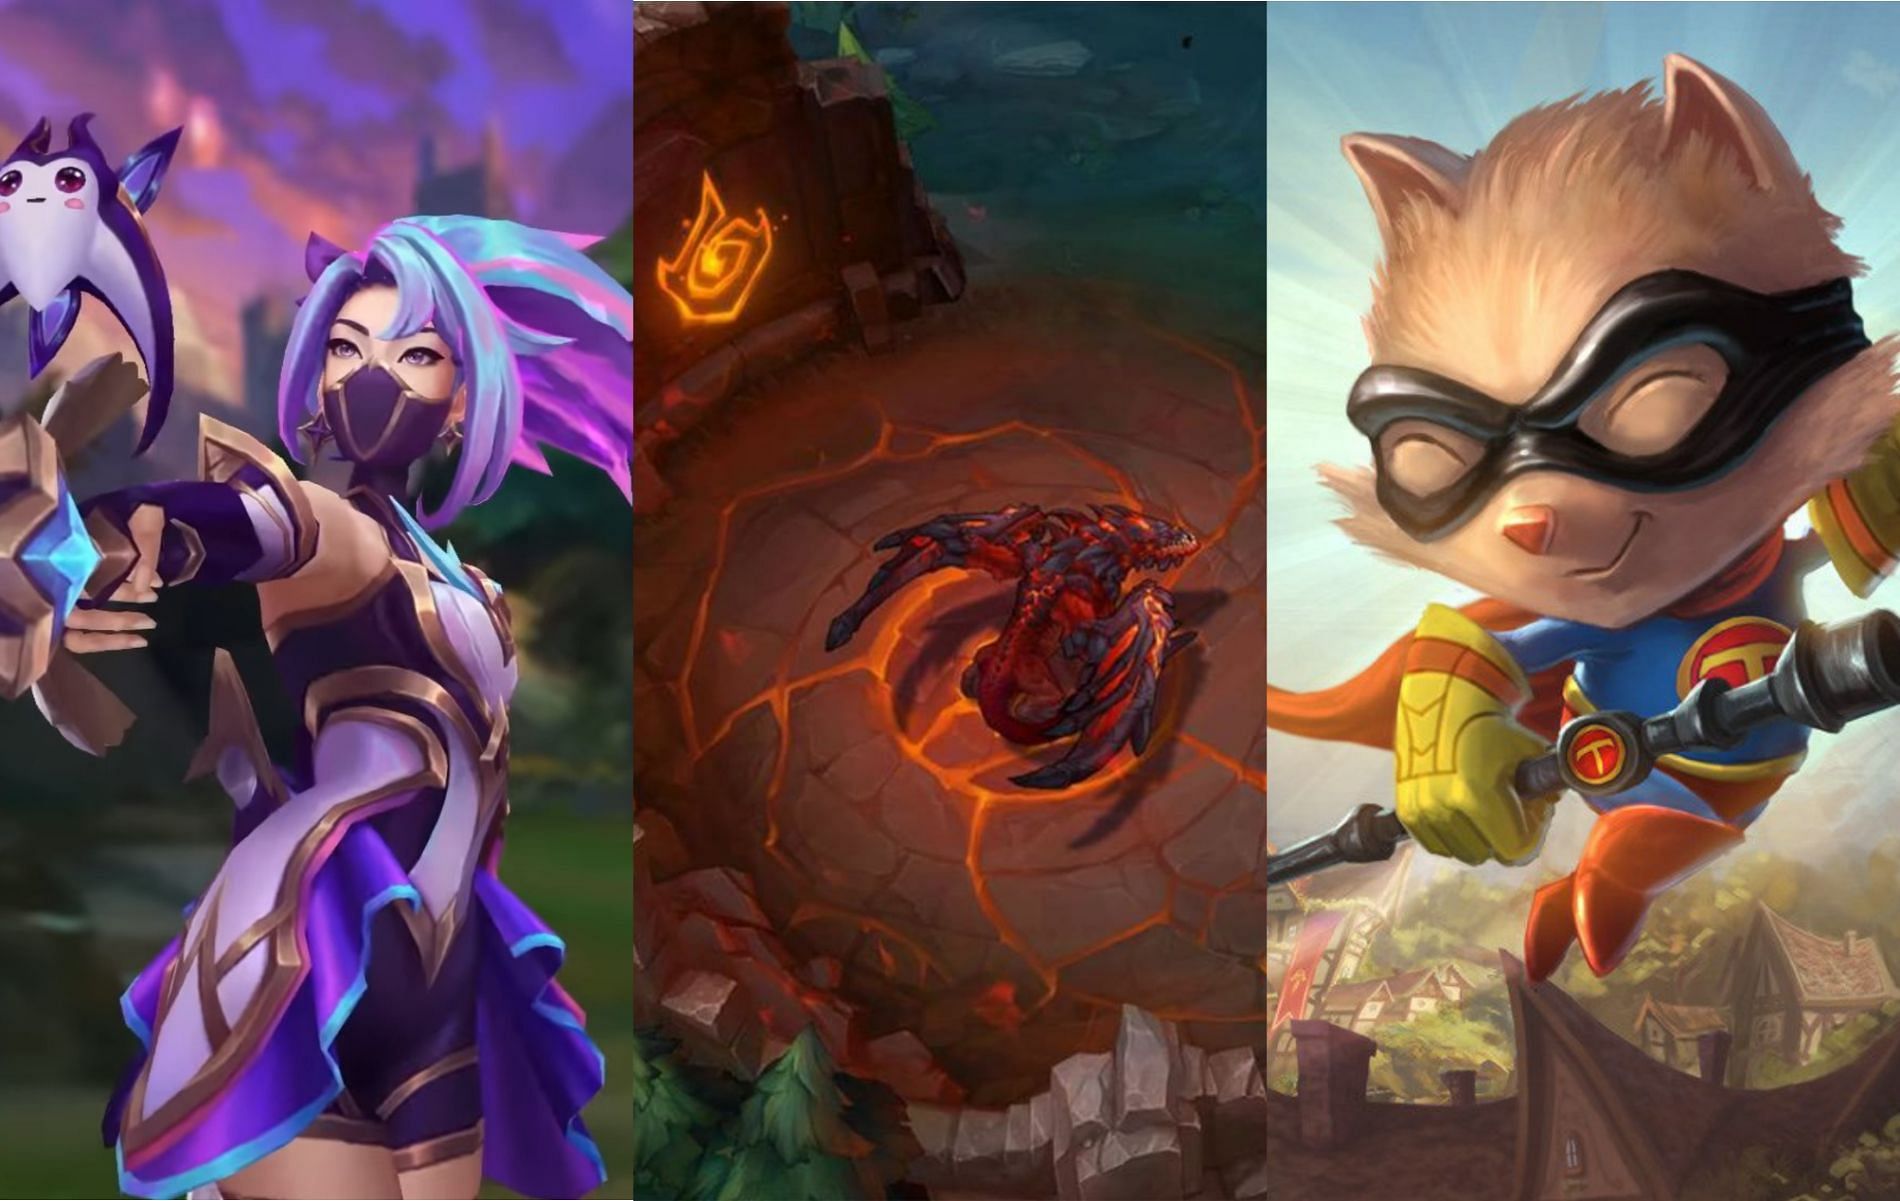 League of Legends update 12.14 (July 26): Massive Elemental Drake changes, Teemo Buffs, and more Star Guardian skins